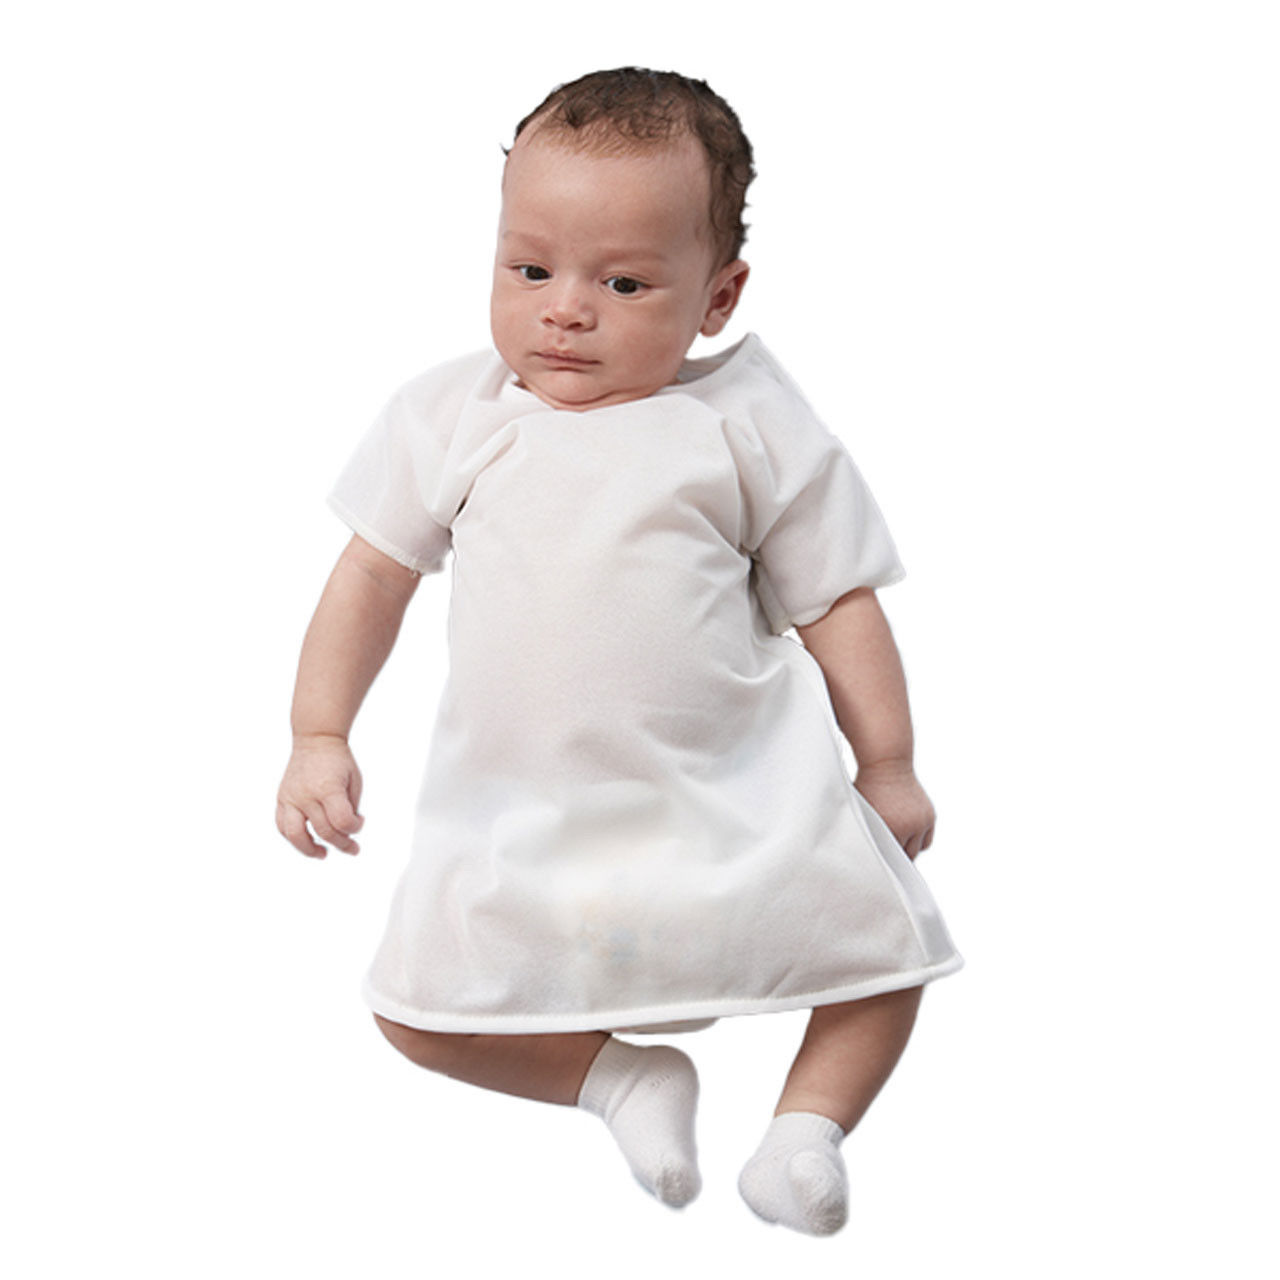 Where can I find the openings on this bulk white baby hospital gown?